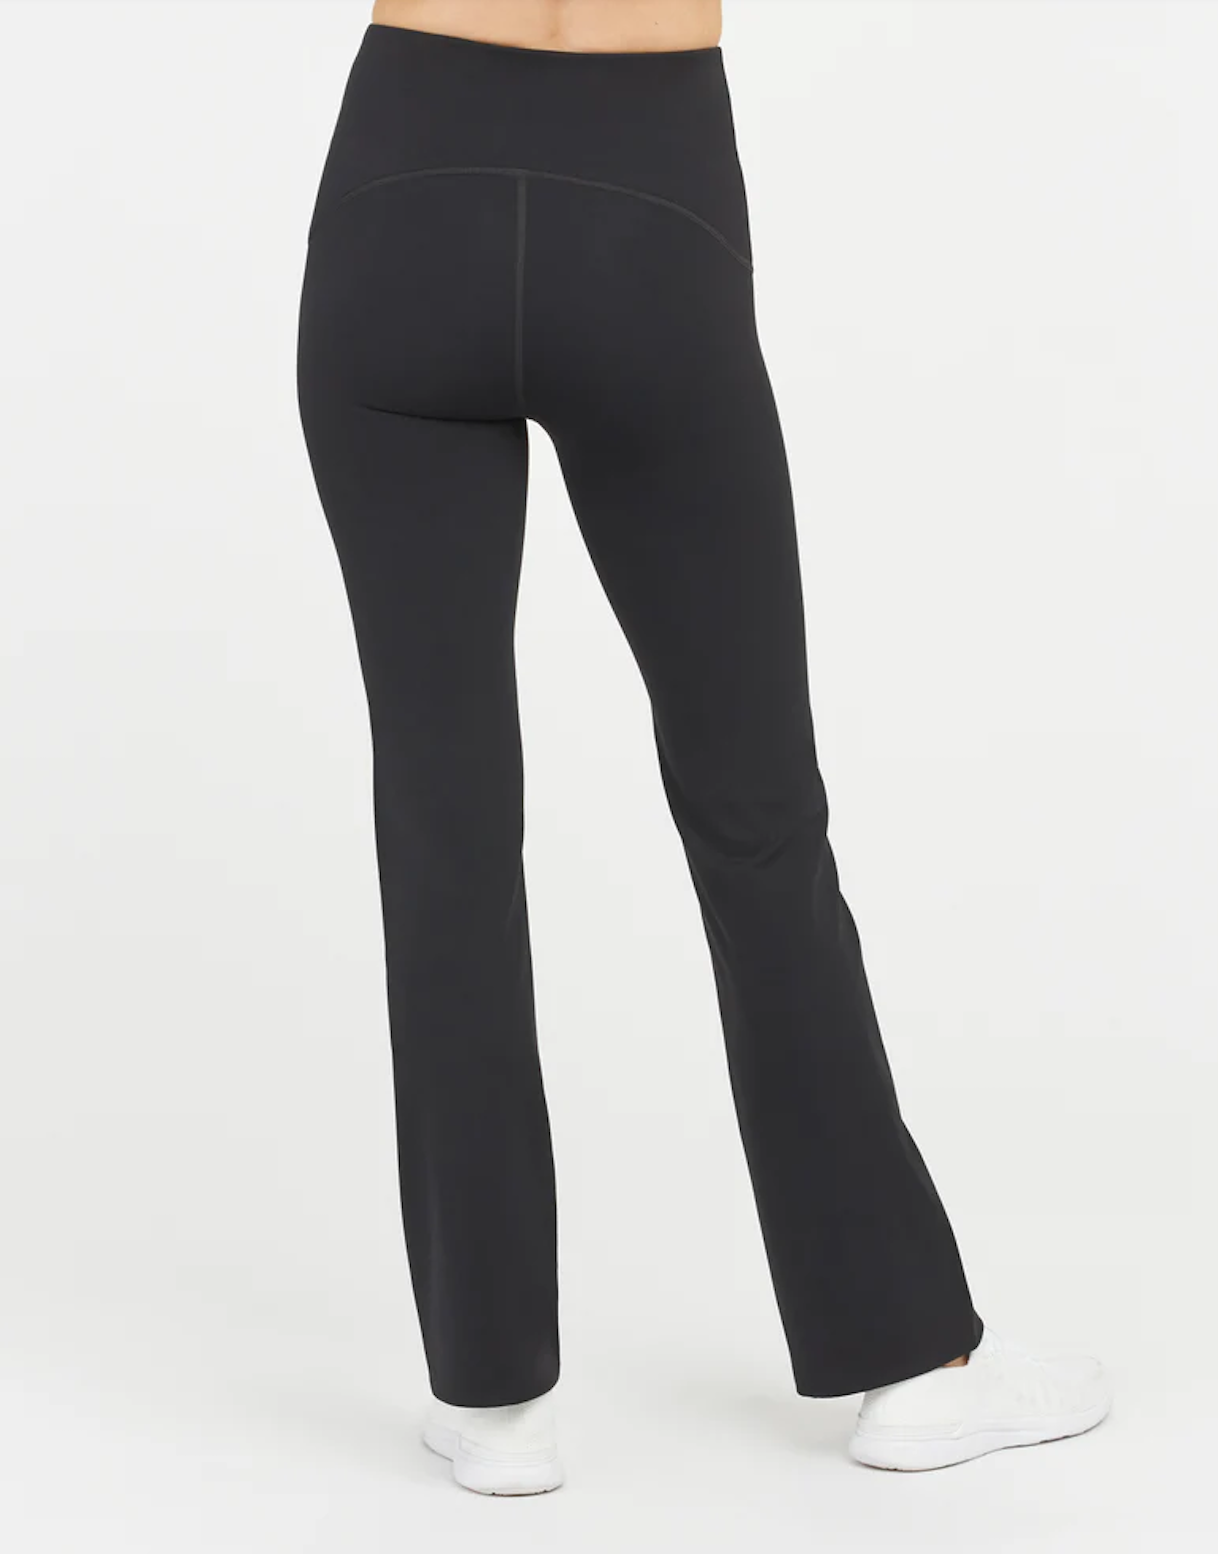 SPANX BOOTY BOOST YOGA PANT IN VERY BLACK